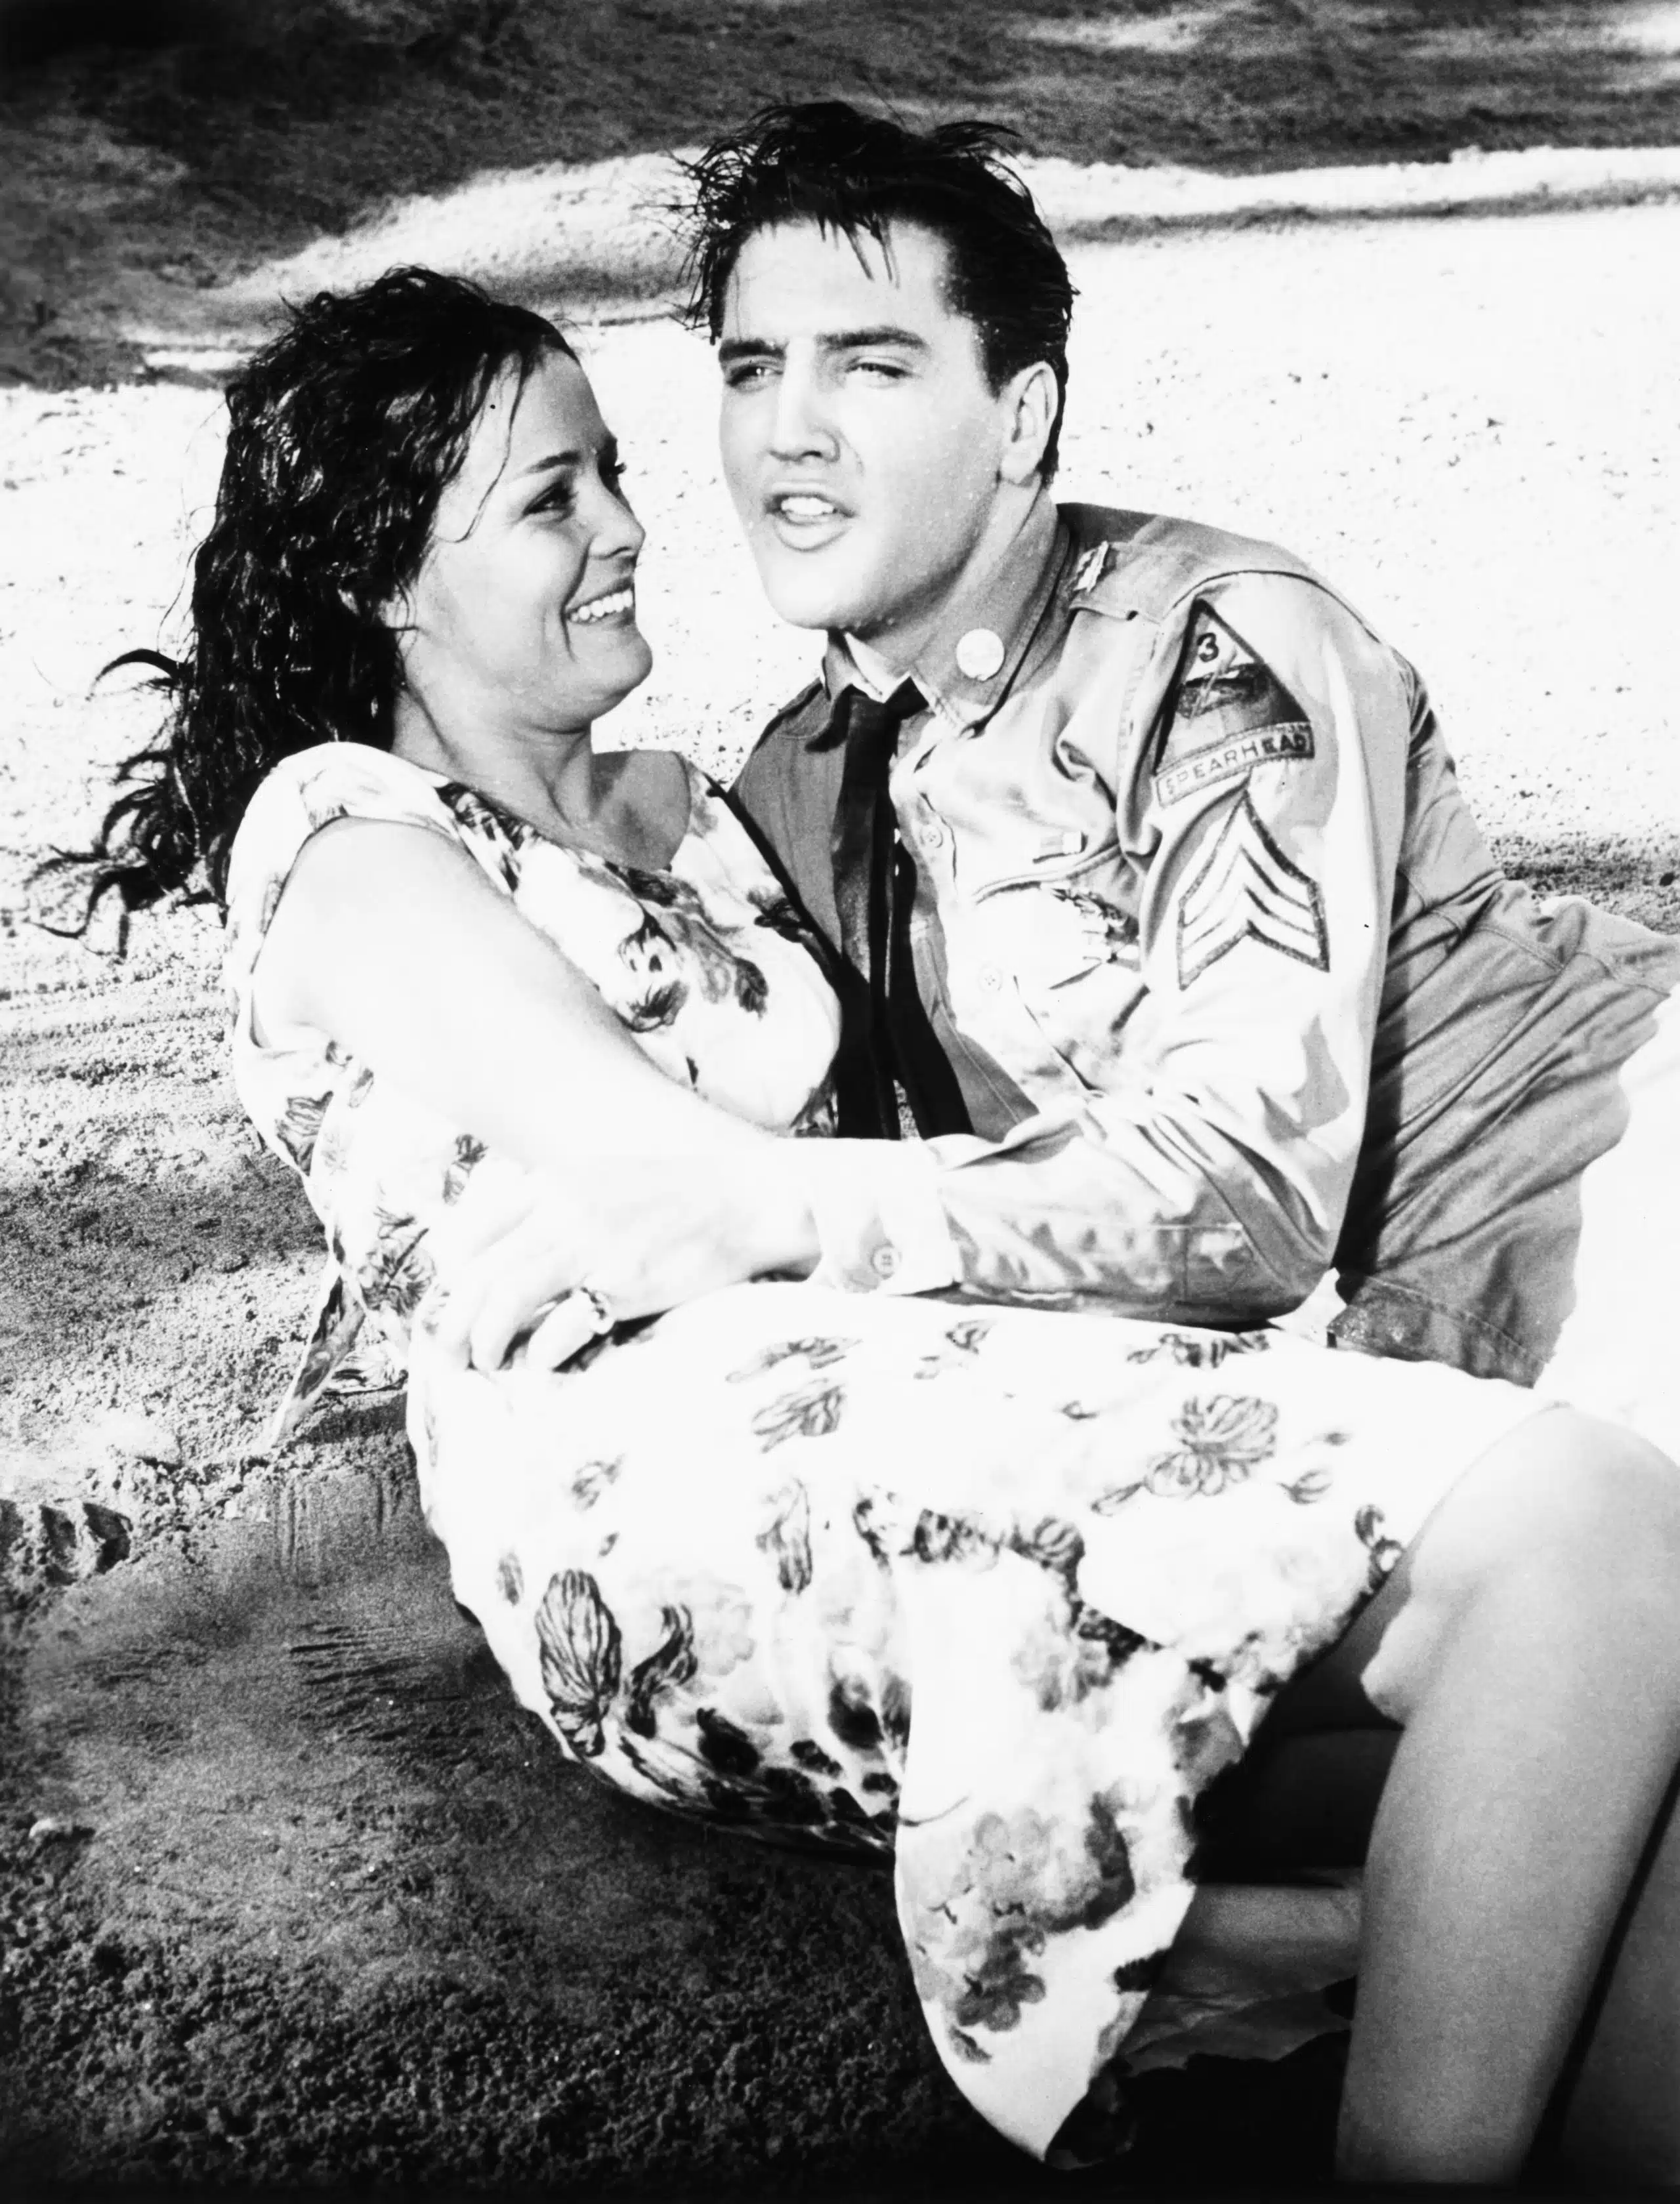 Elvis marriage proposal rejected